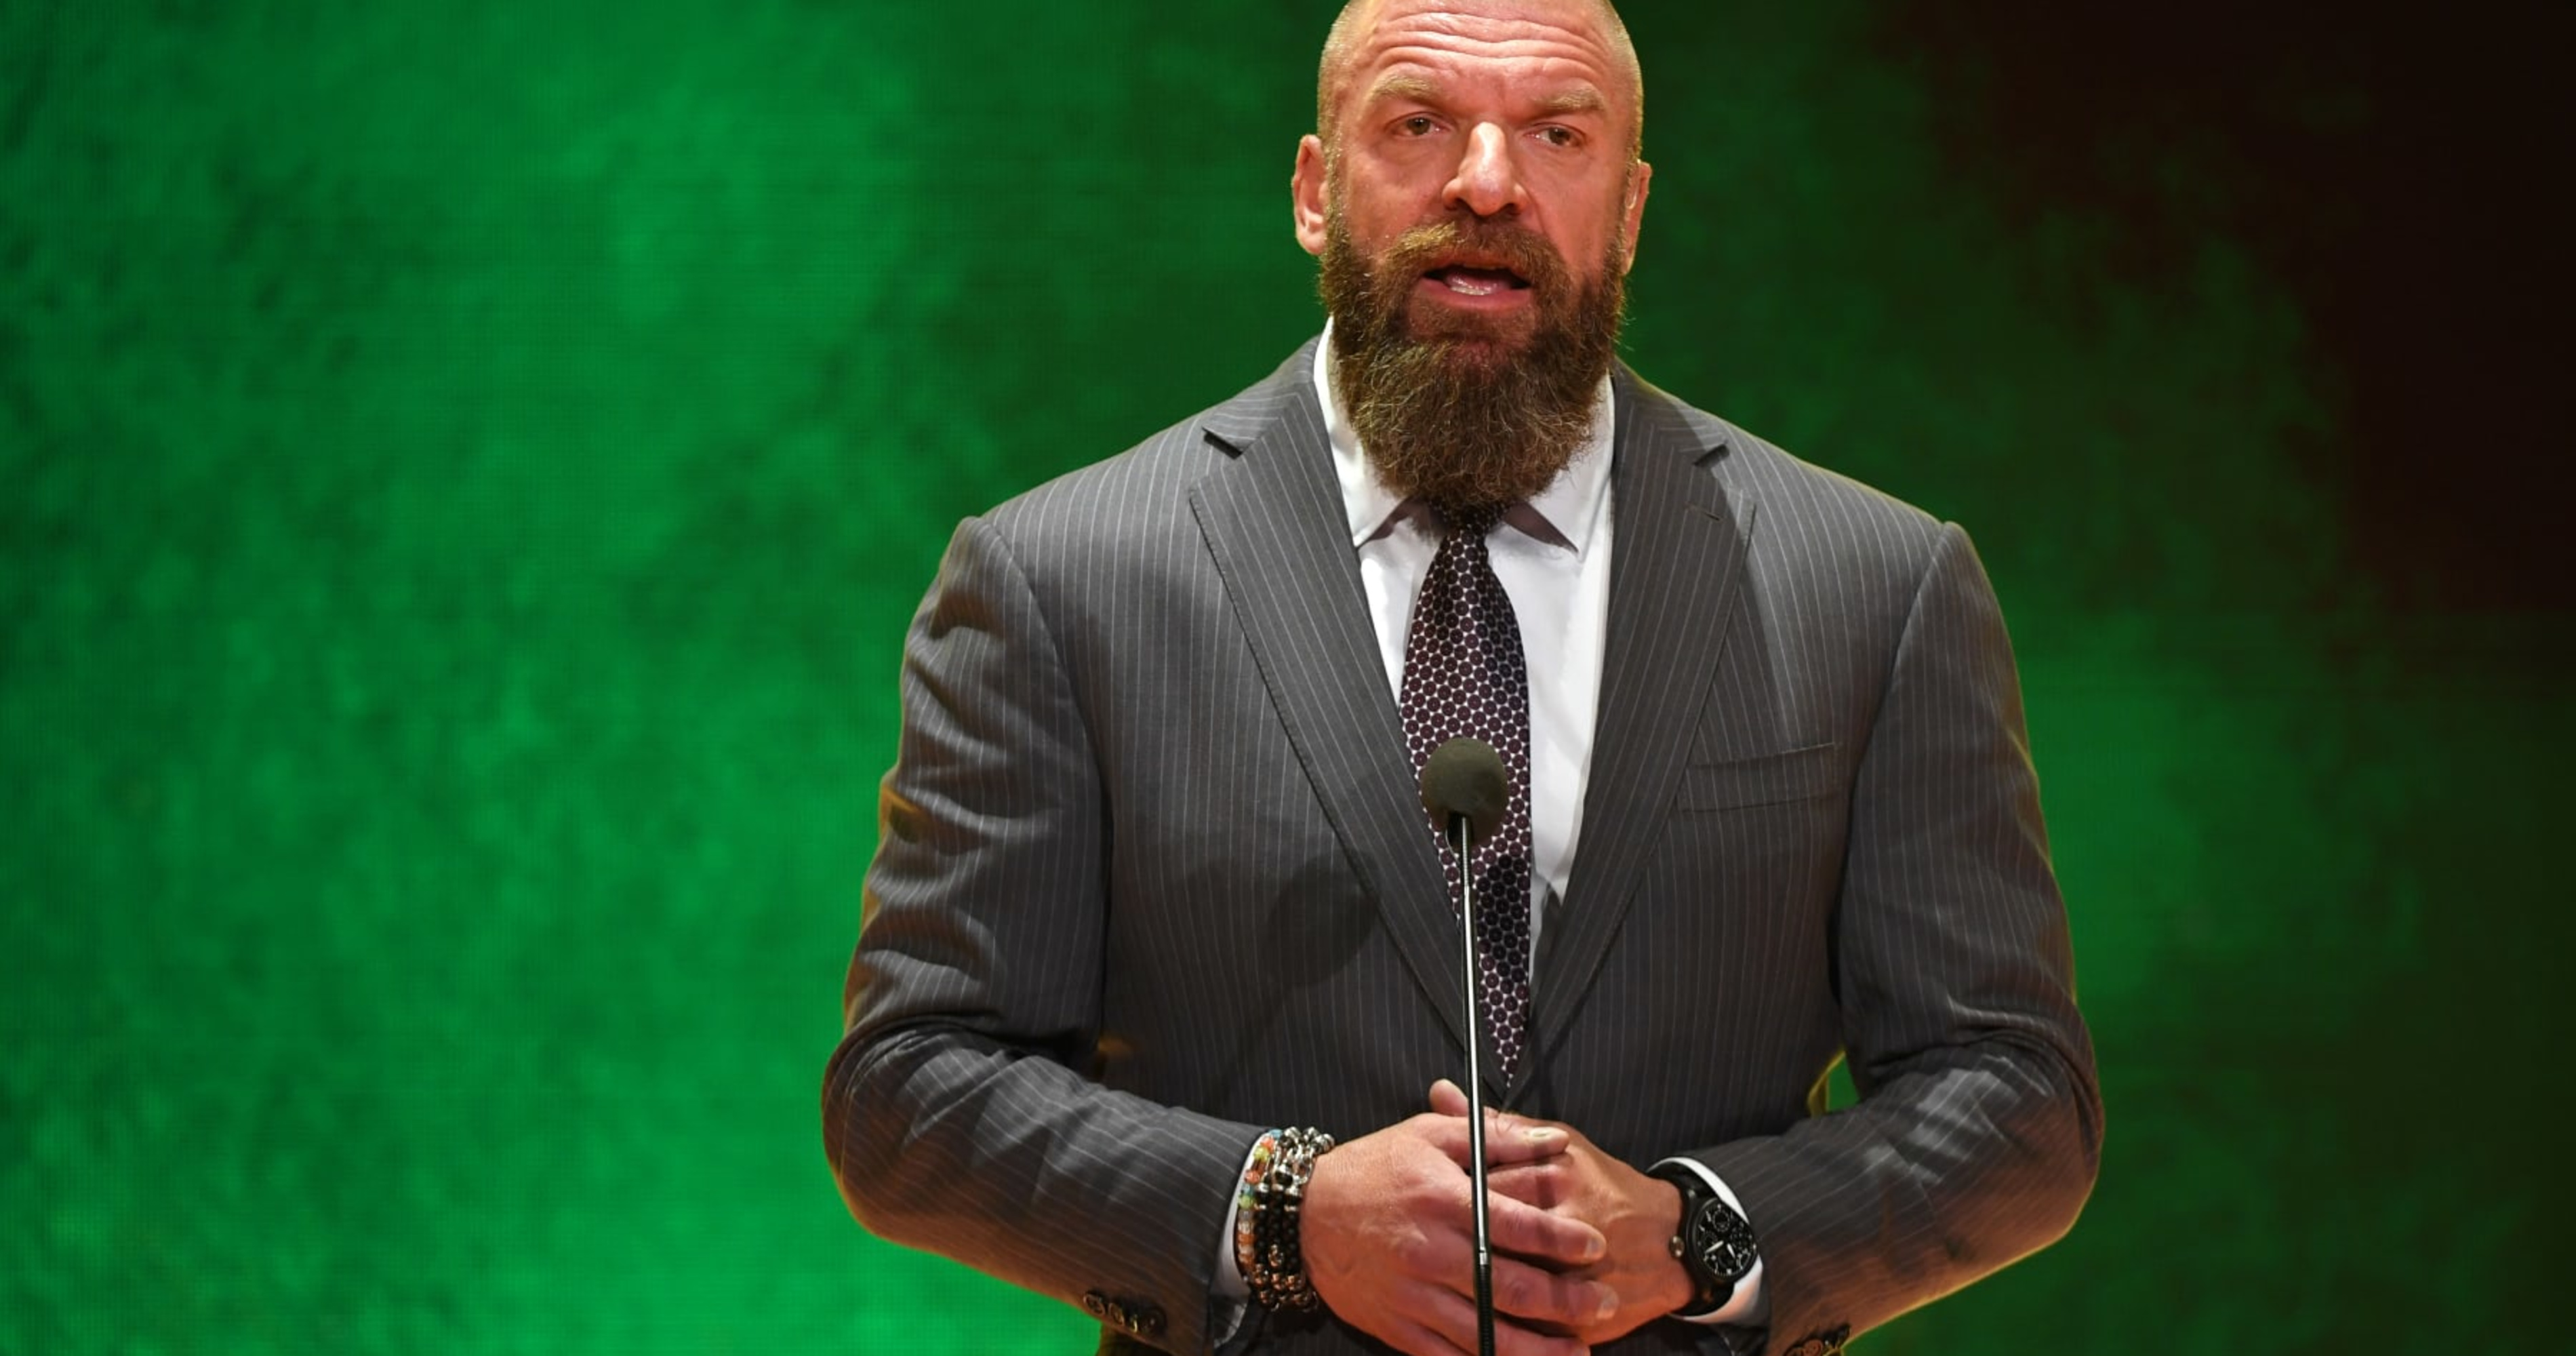 Hd Hhh Video Sex - Triple H Returns to WWE as Executive VP of Talent After Heart Issues |  News, Scores, Highlights, Stats, and Rumors | Bleacher Report